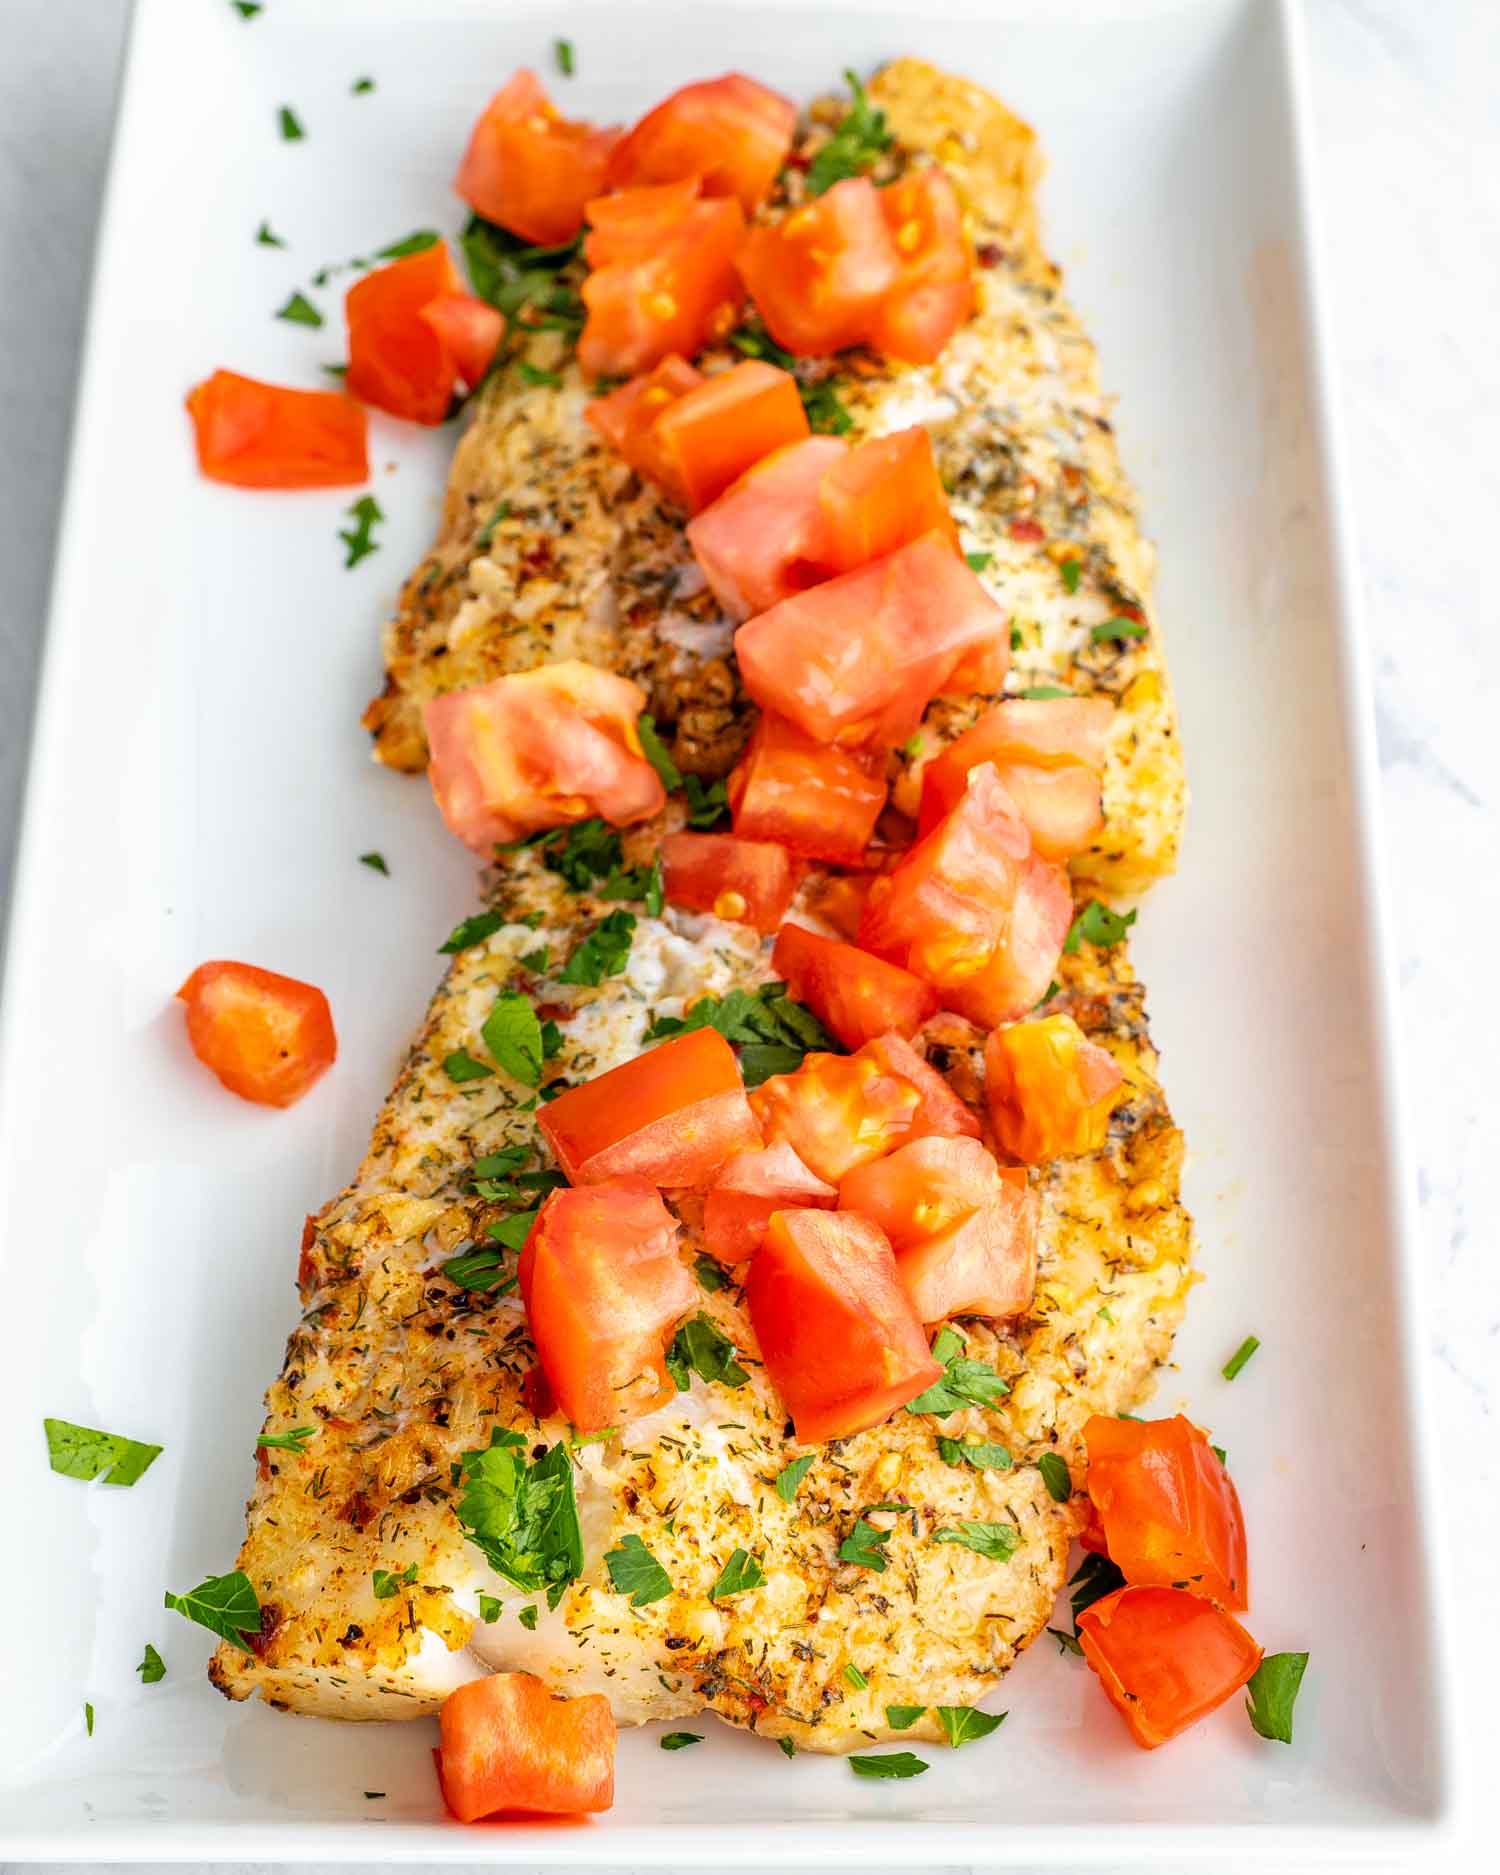 baked lemon garlic halibut filet topped with tomatoes on a white dish.